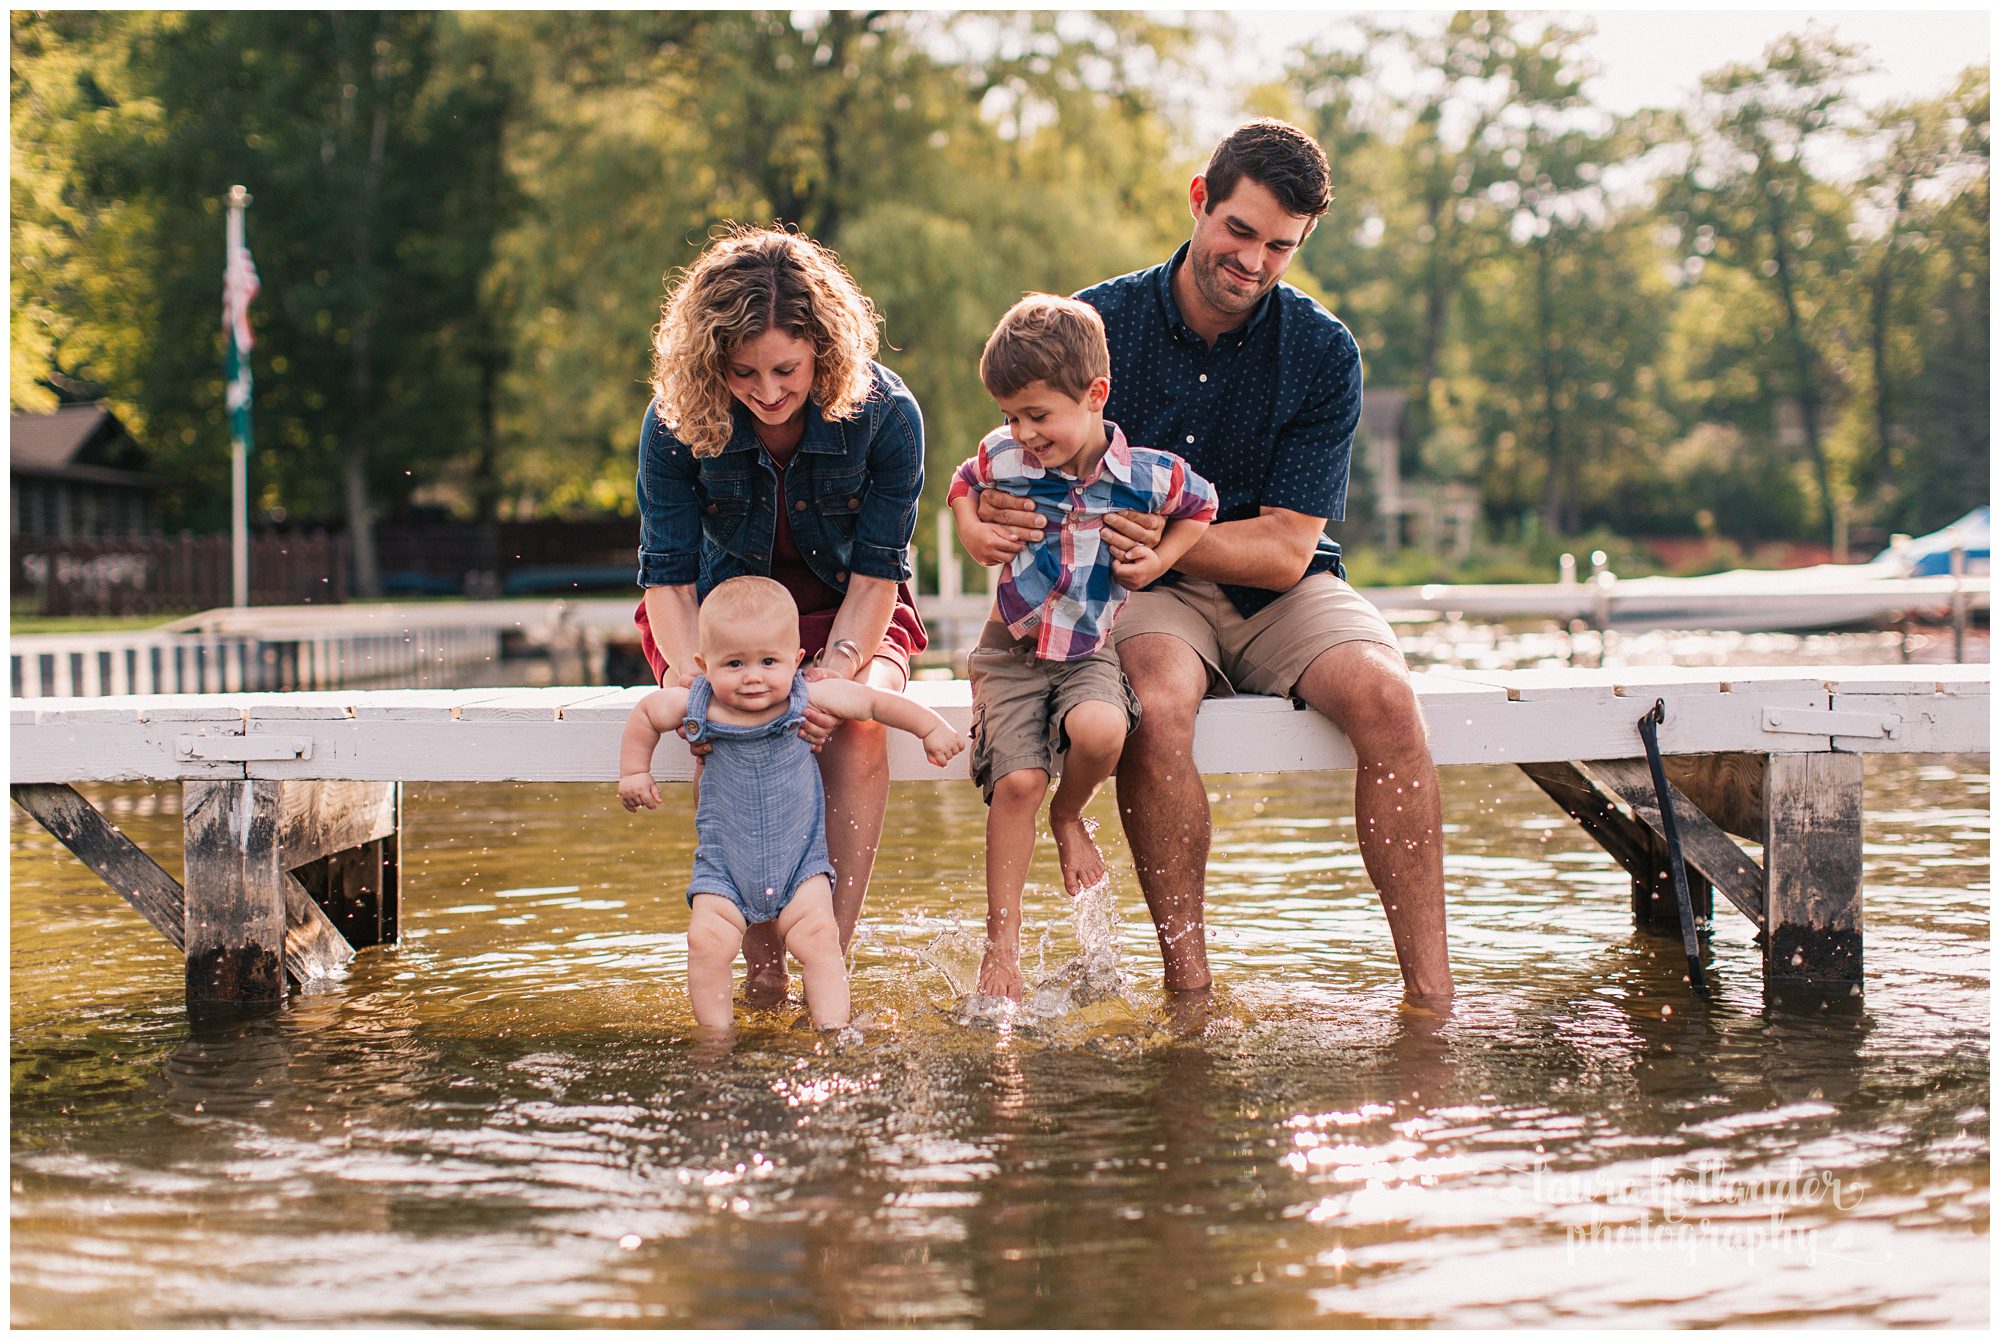 family of four, two brothers, cottage summer mini sessions, Laura Hollander Photography